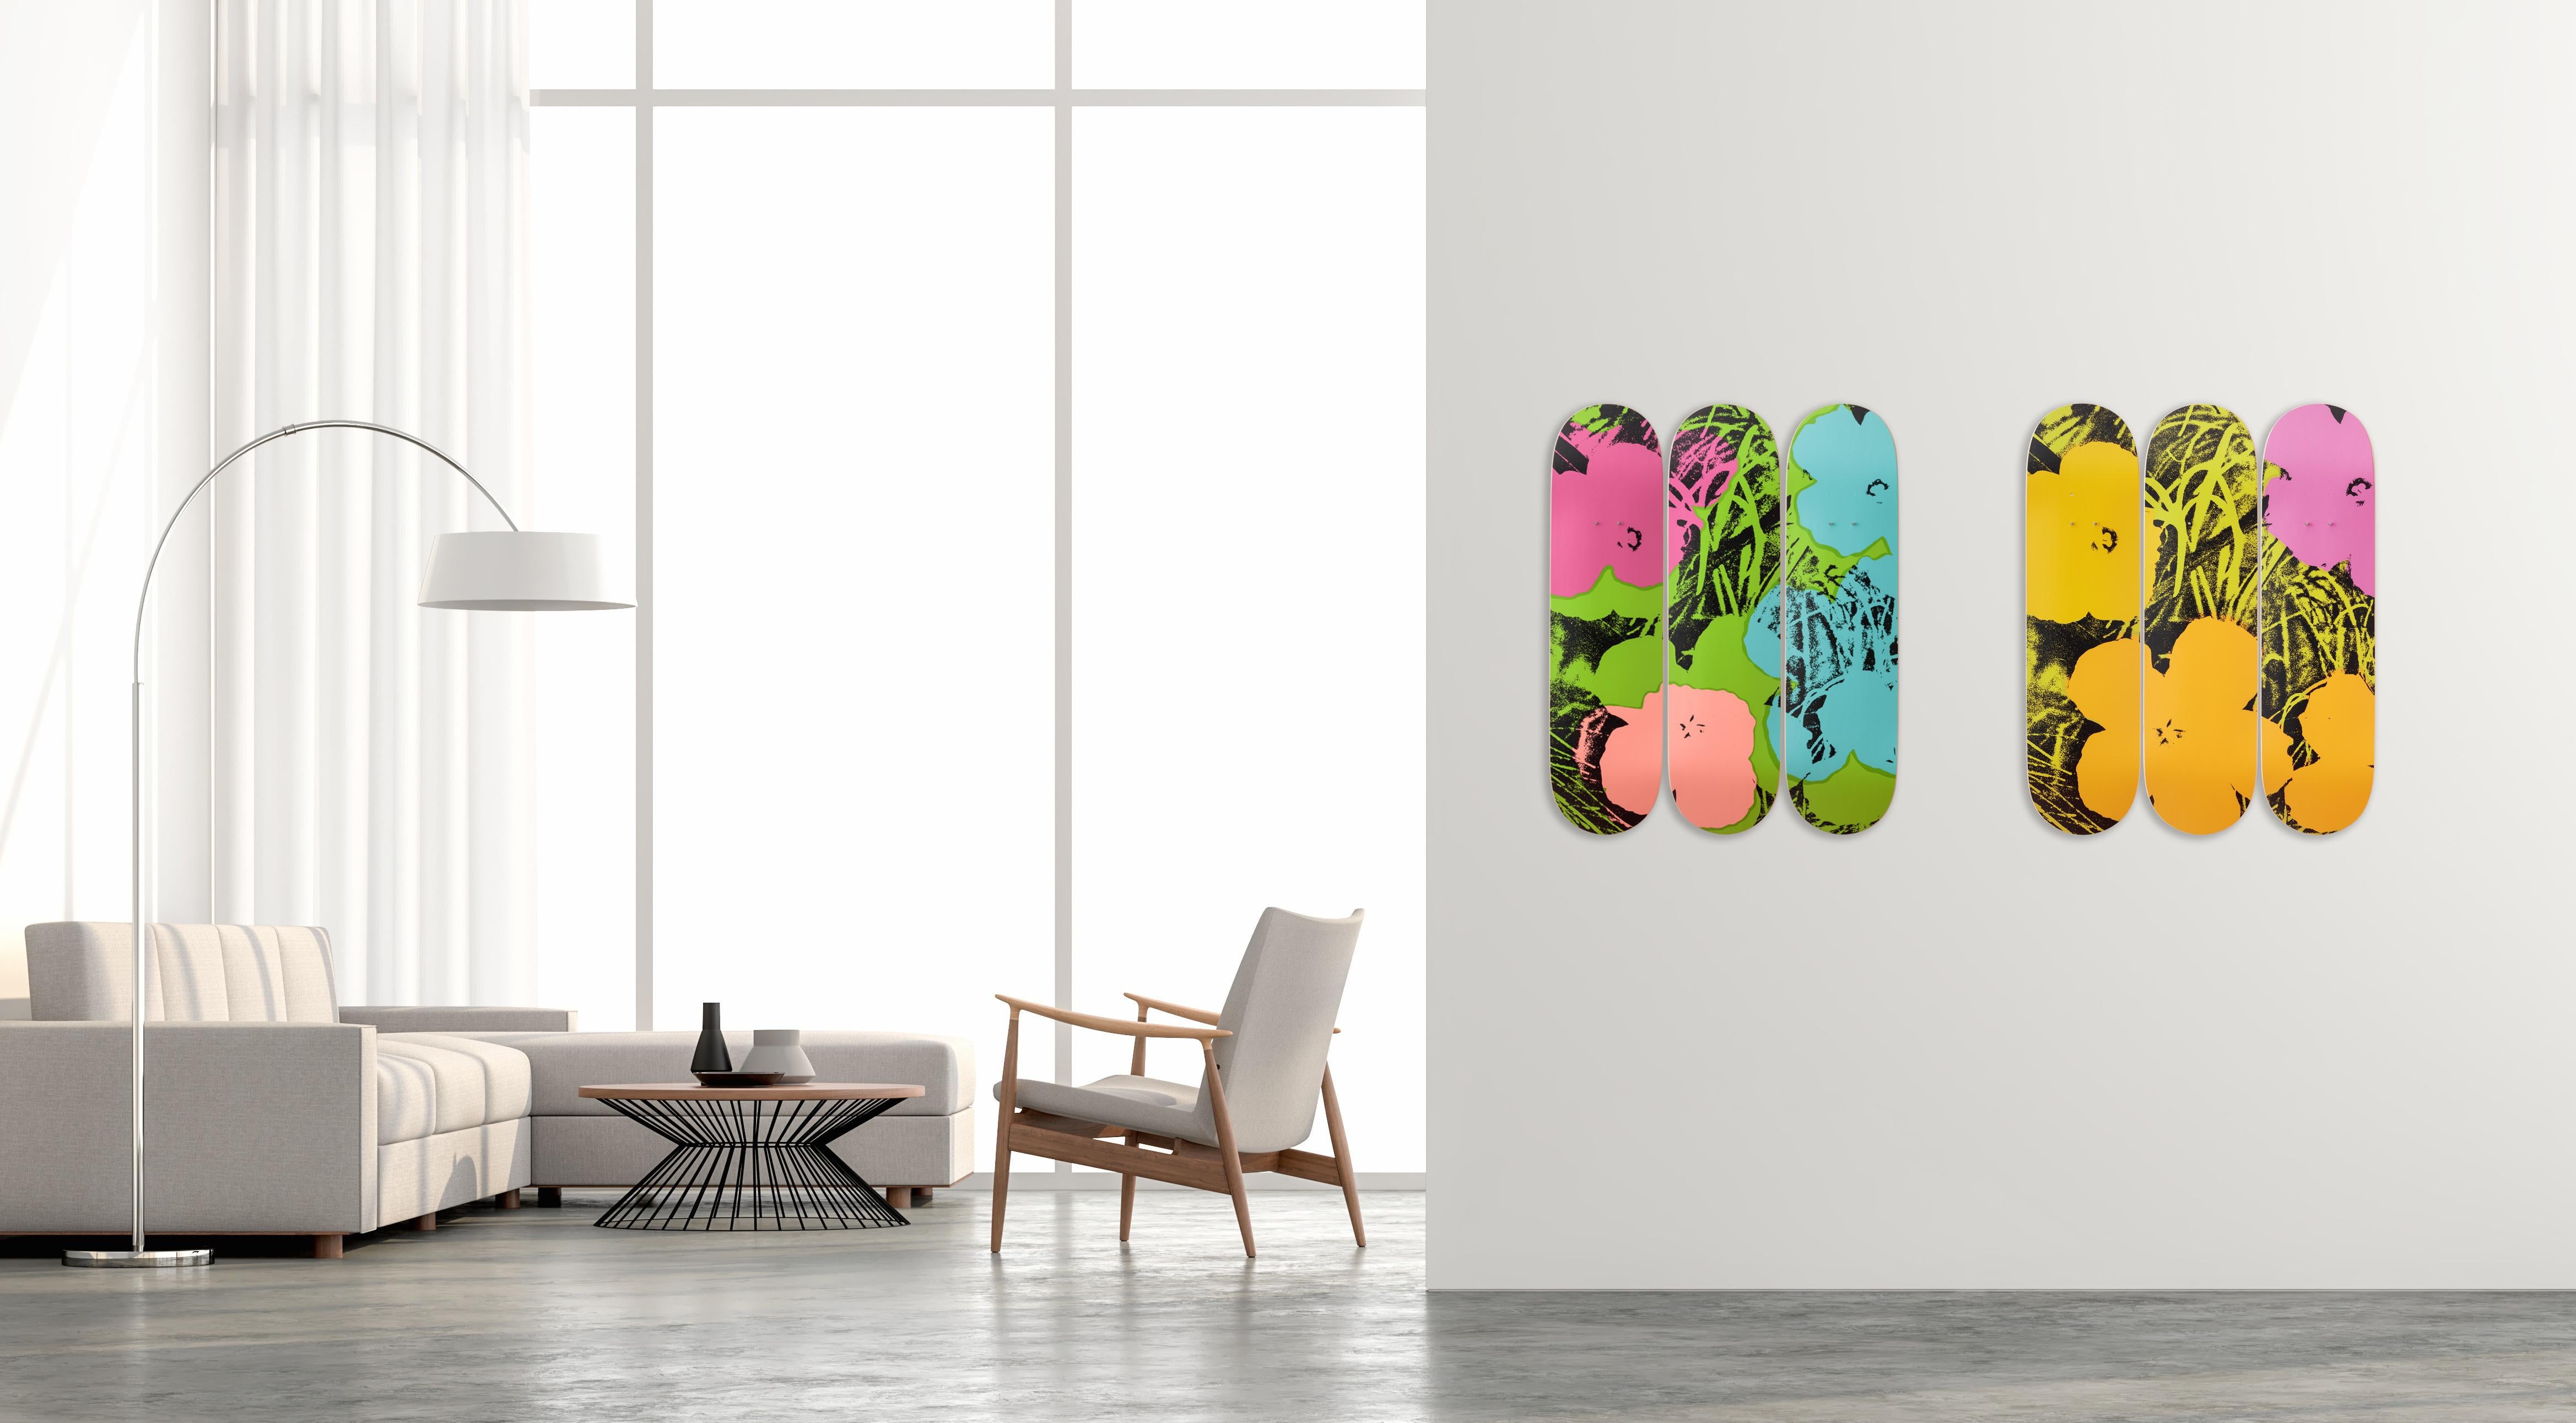 The Skateroom with the Andy Warhol Foundation
set of three-skateboard decks
7-ply Canadian Maplewood with screenprint
Measures: Each: 31 height x 8 inches
approx. 31 height x 24 inches when installed
mounting hardware included
edition of 500